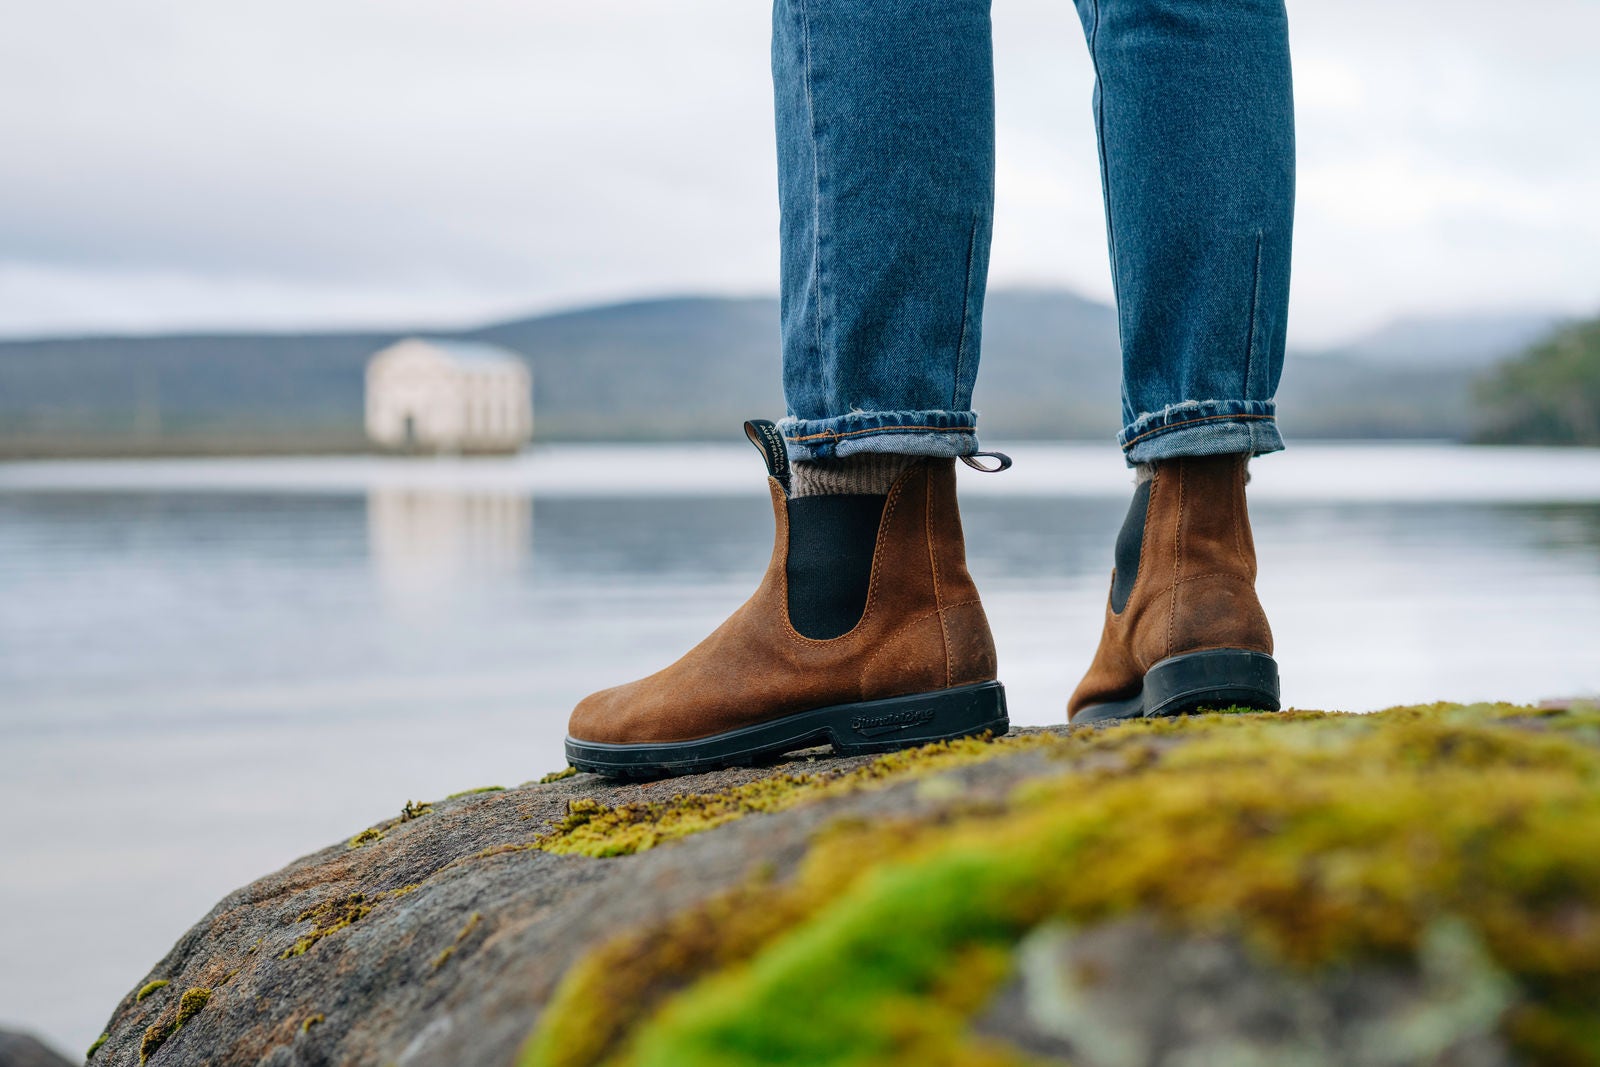 person wearing blundstone boots while standing on rock overlooking a water lake view